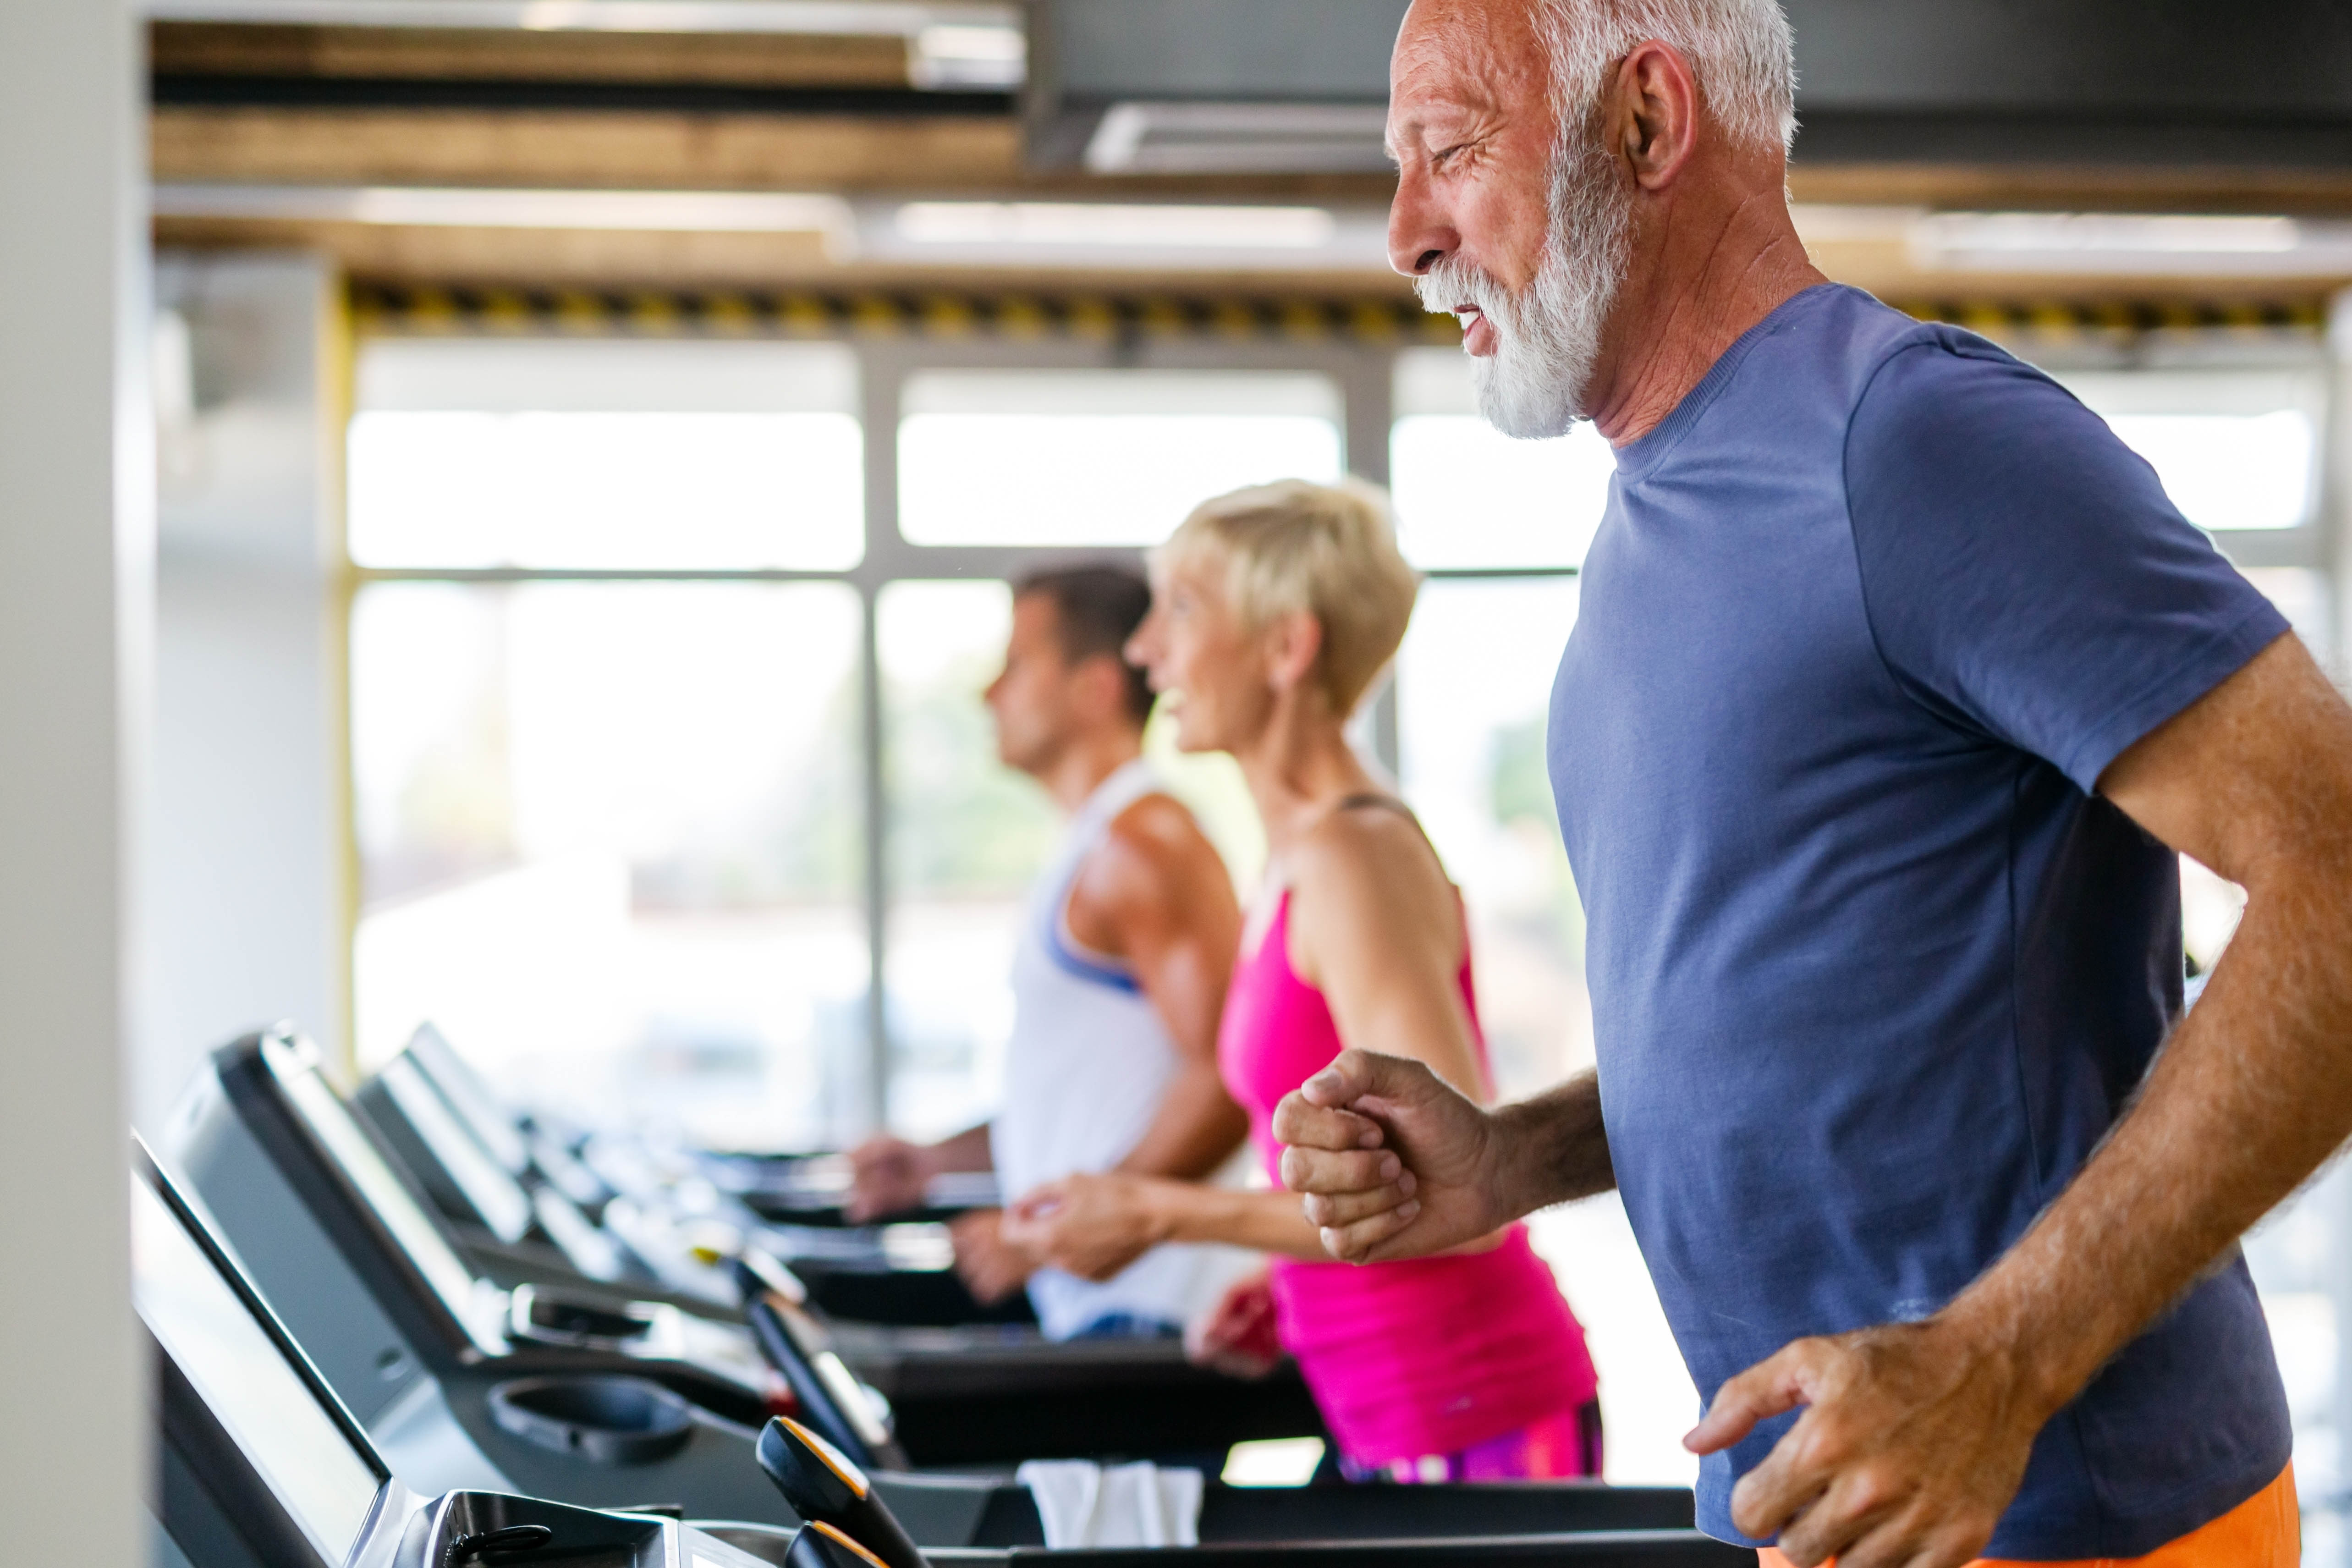 Older man running on a treadmill in a gym, with others in the background